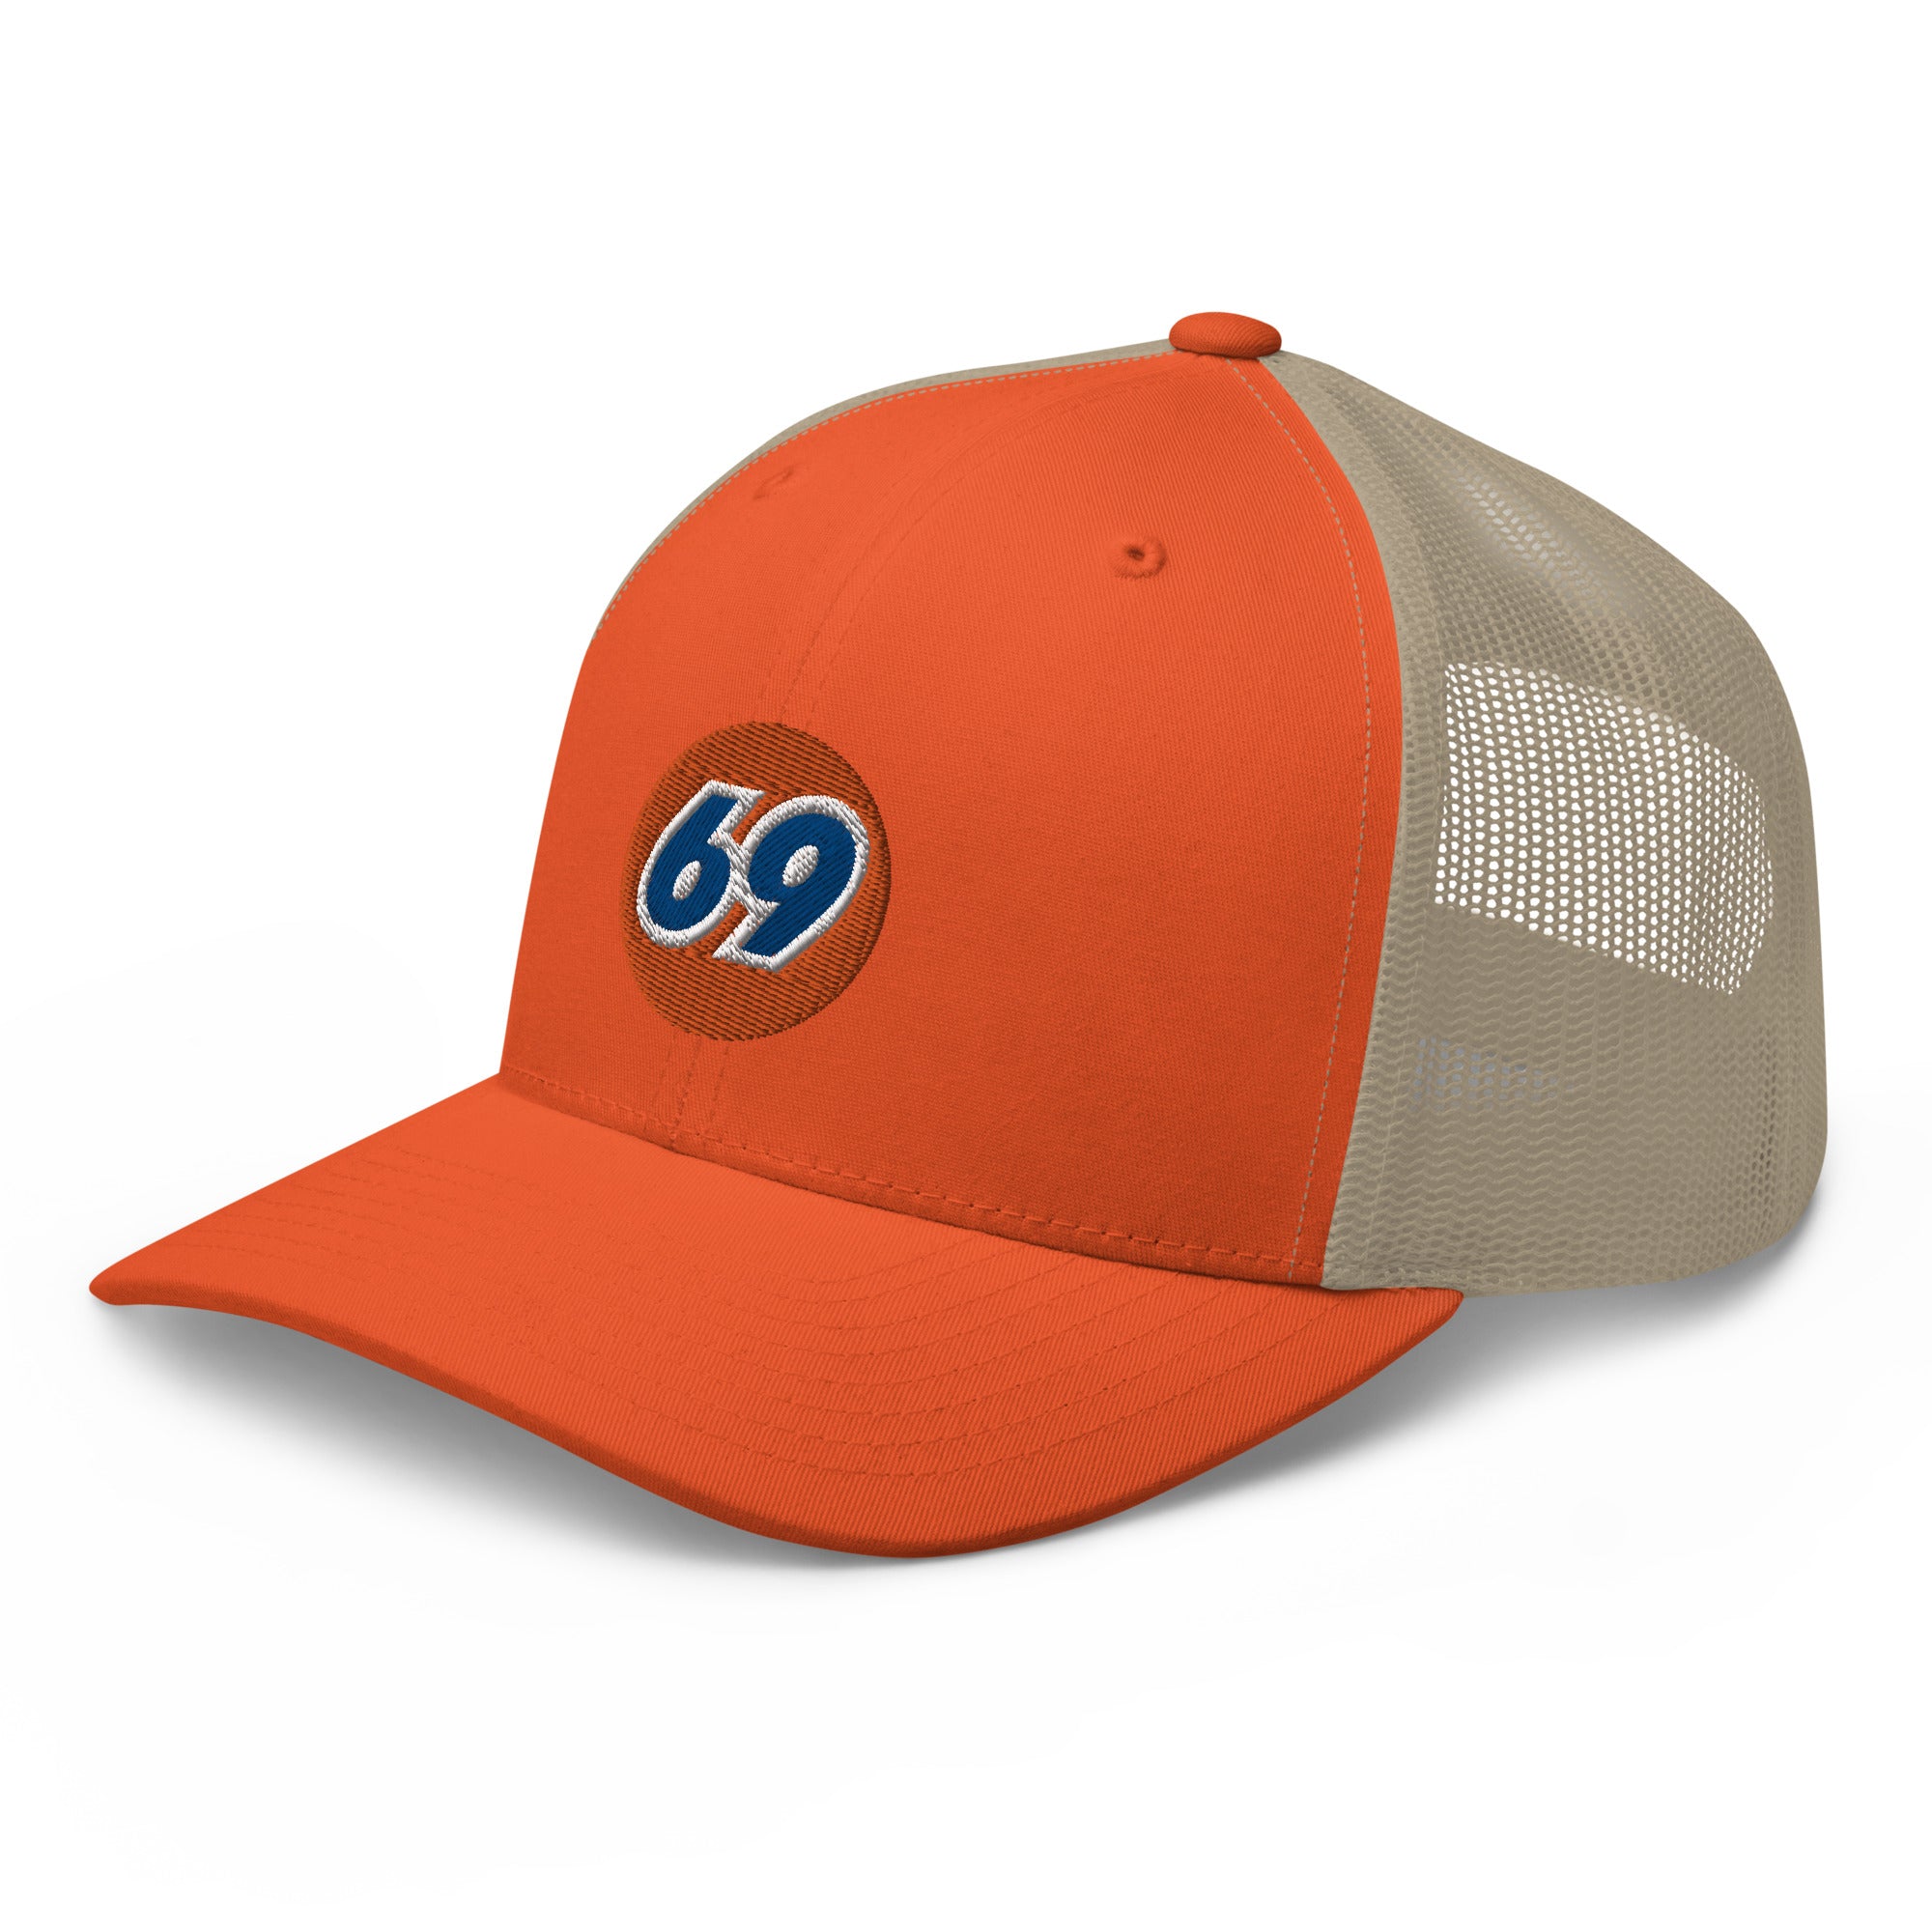 76 Oil Gas Station Parody 69 Official Fuel Racing Trucker Cap Snapback Hat